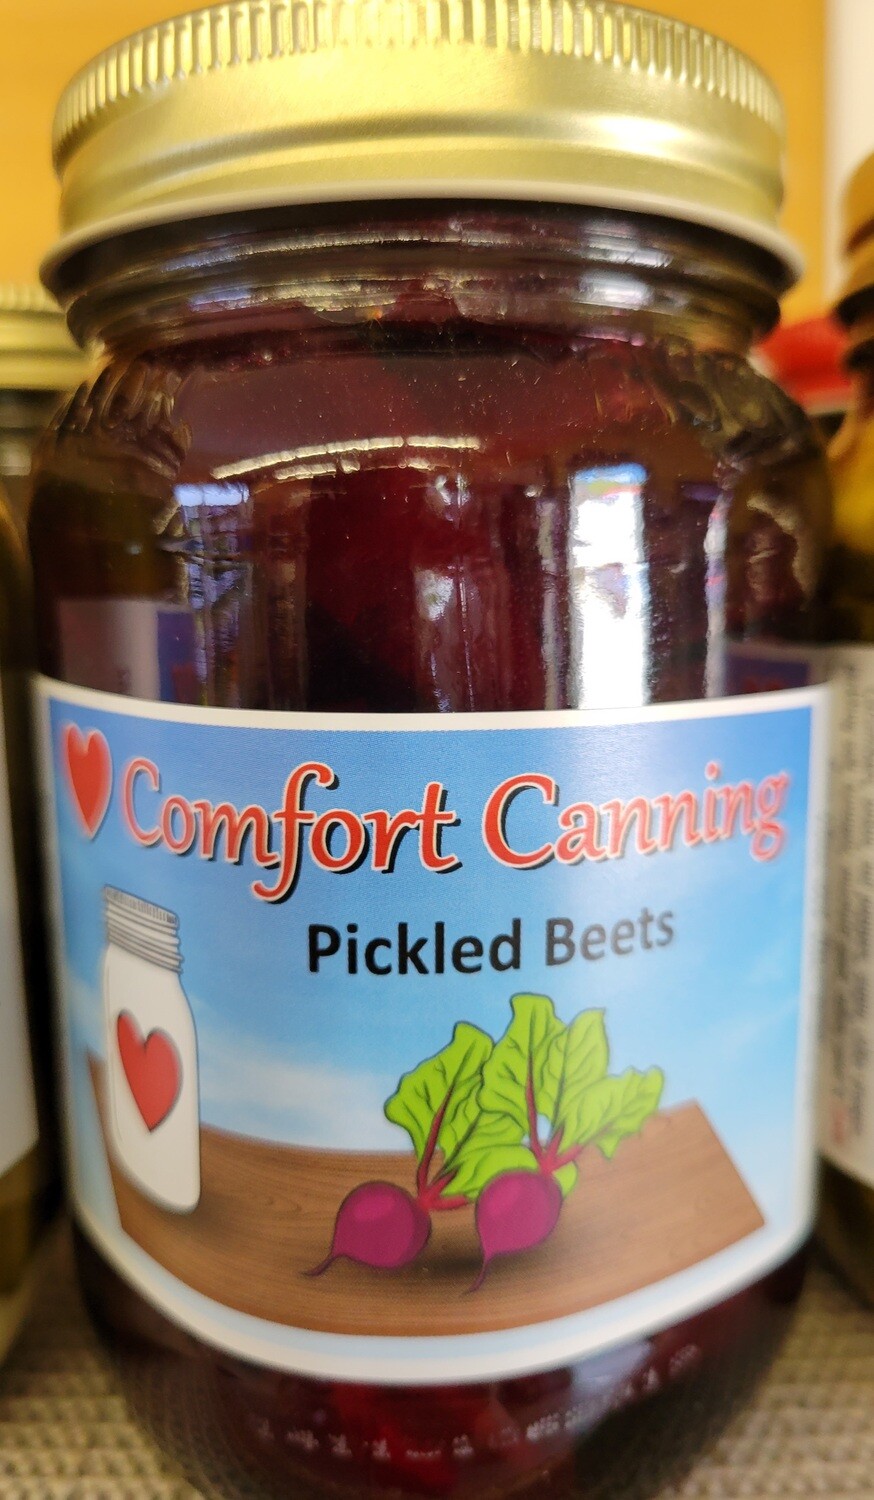 Comfort Canning - Pickled Beets